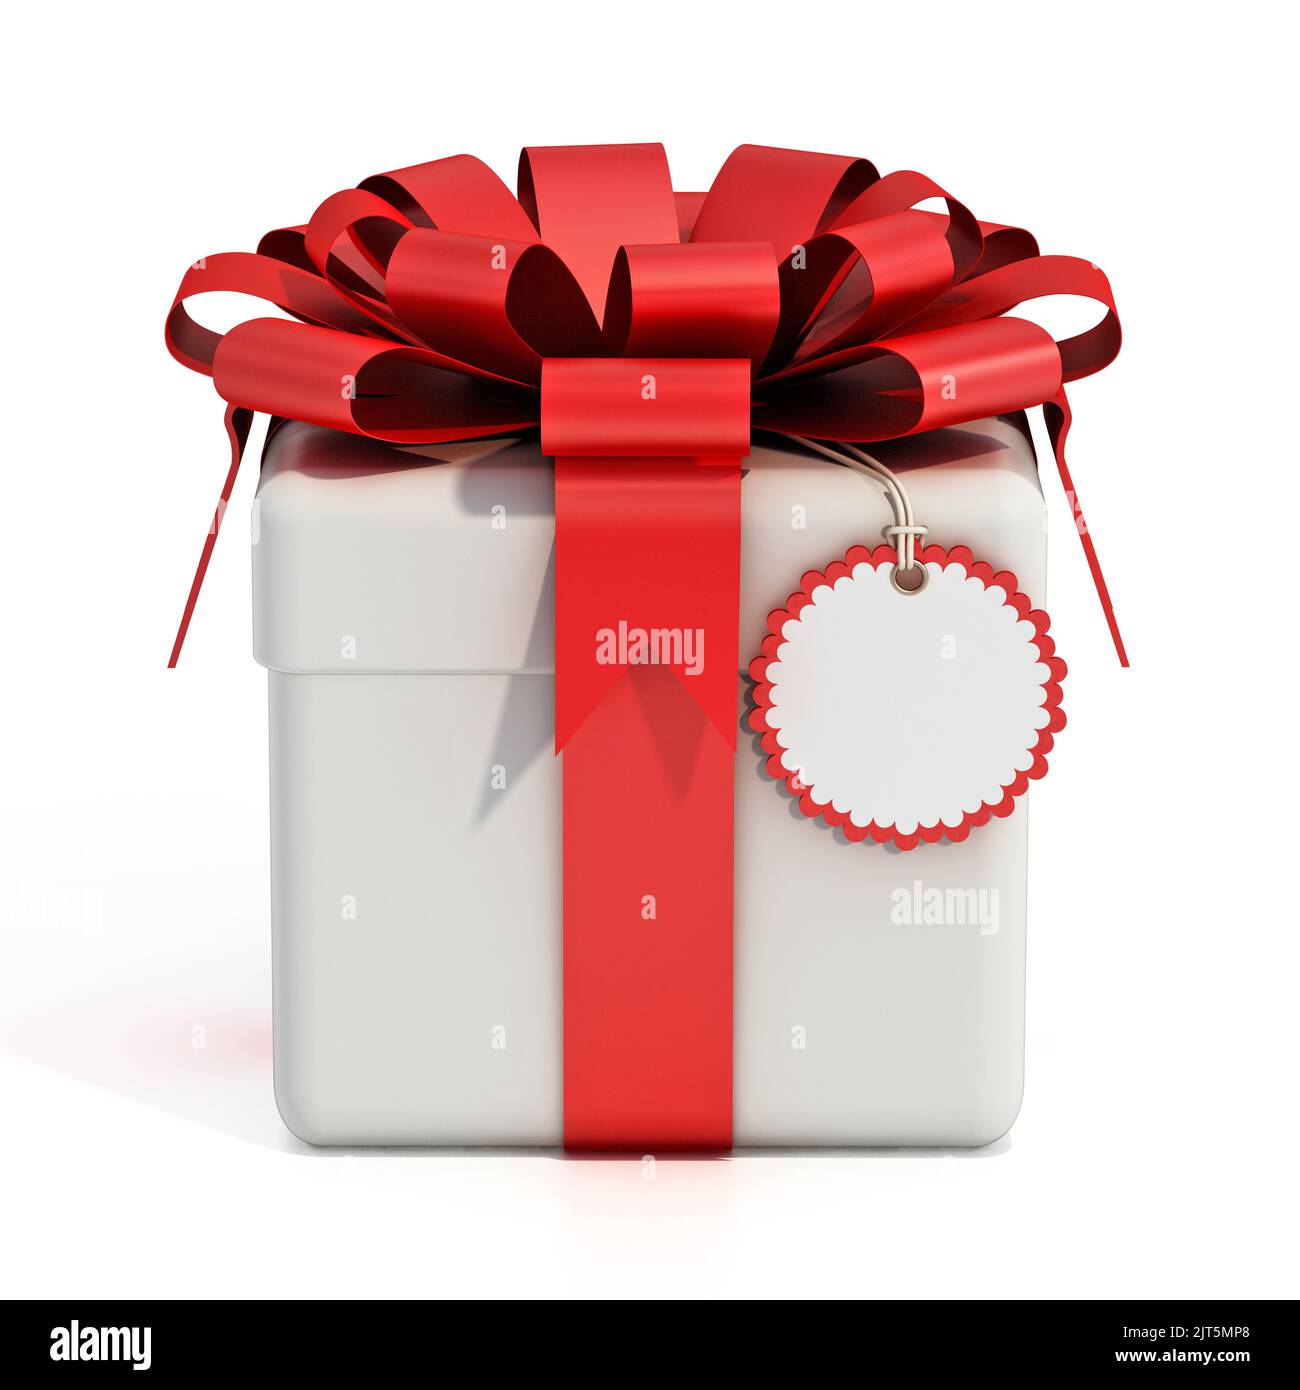 Giftbox with blank label isolated on white background. 3D illustration. Stock Photo